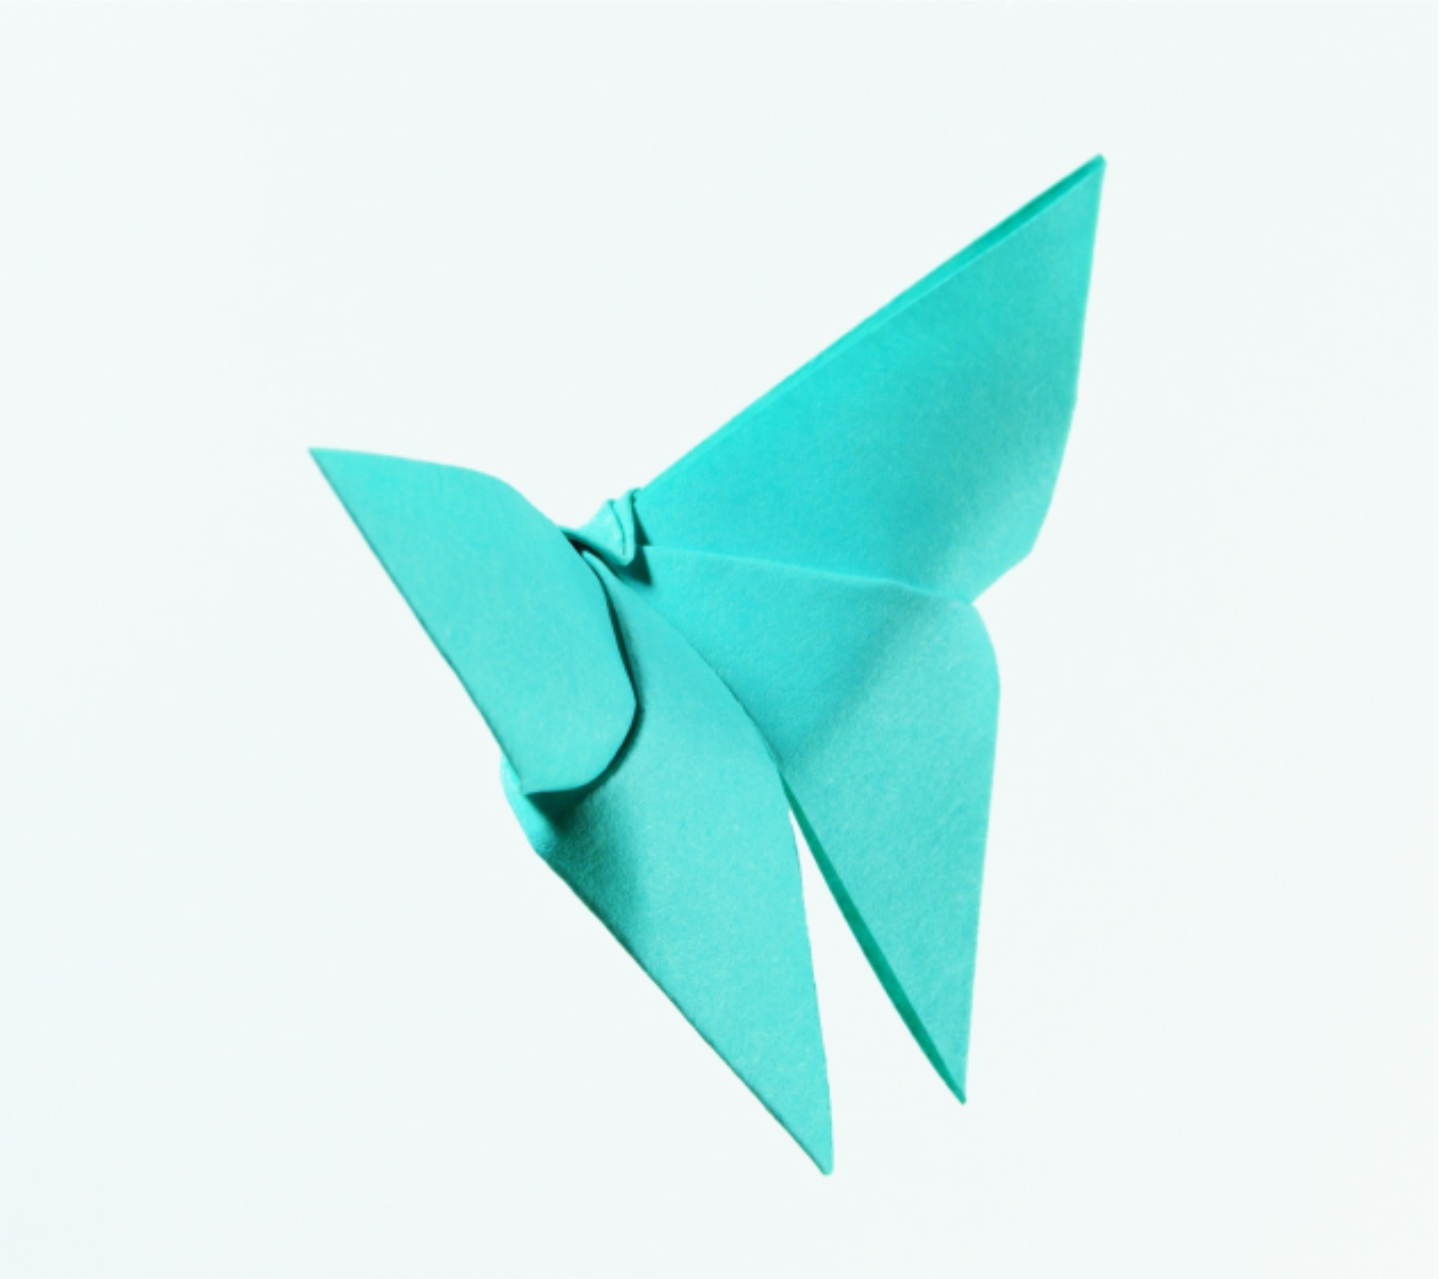 Origami Butterfly